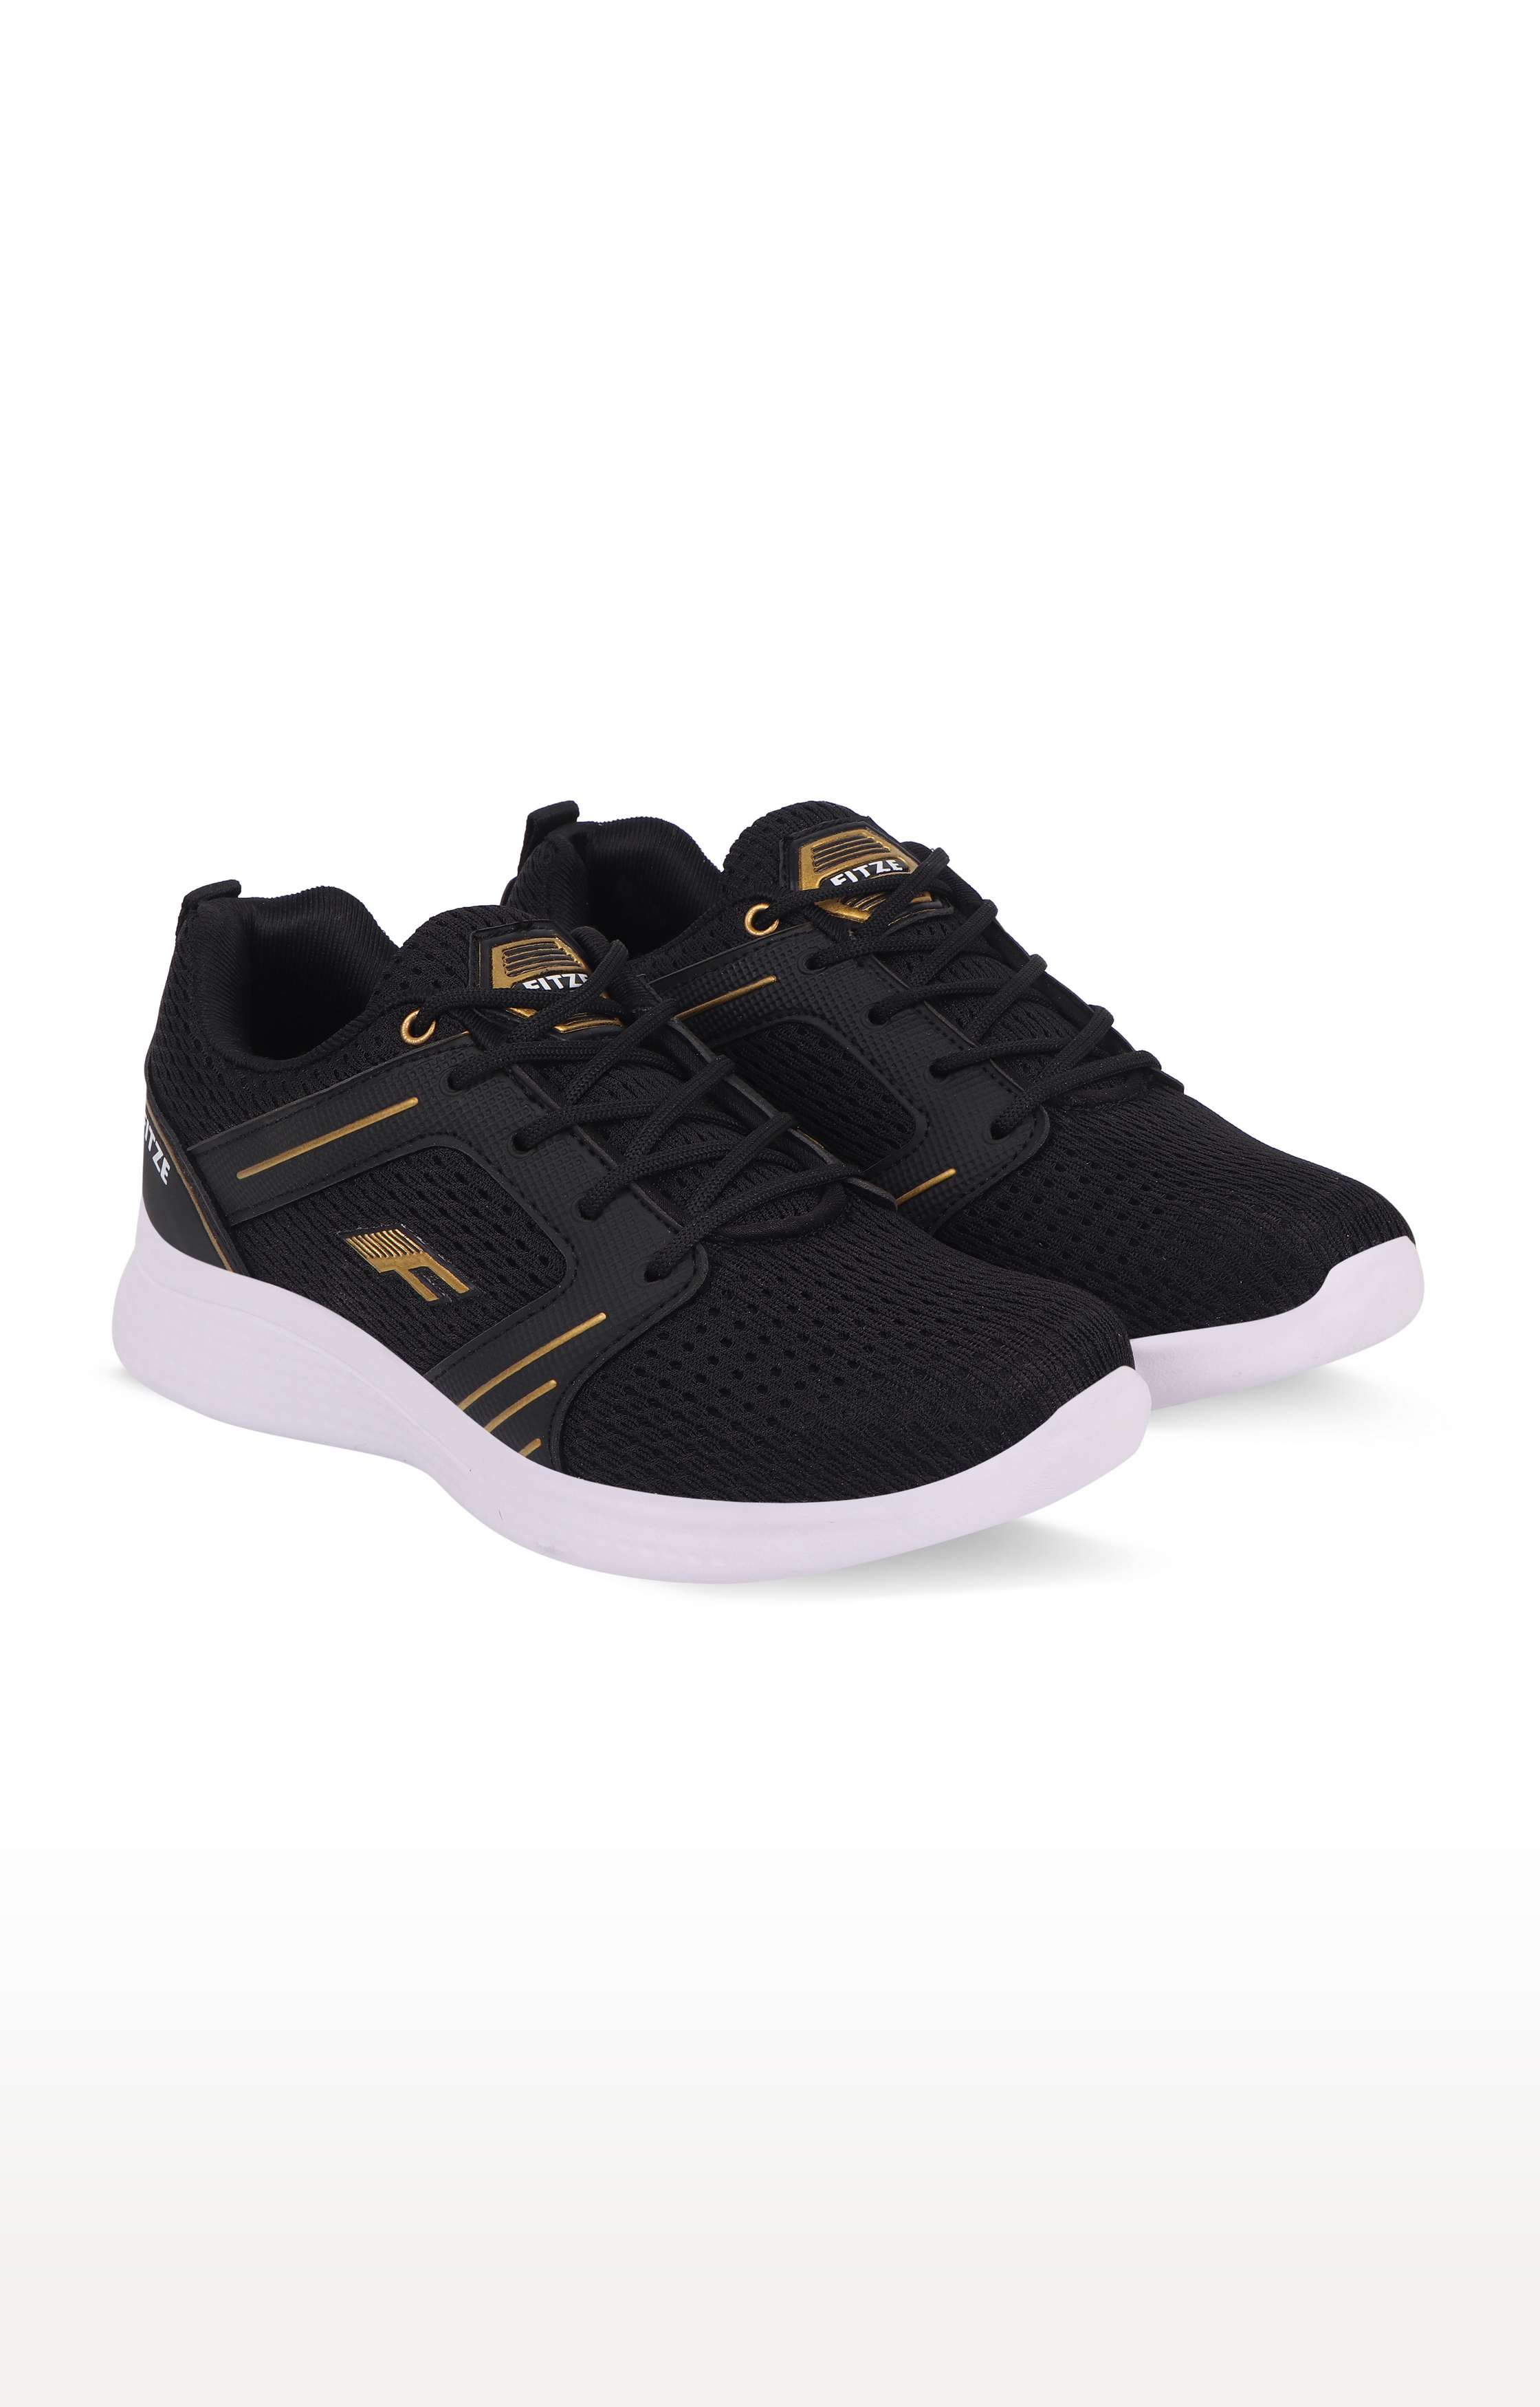 Fitze | Black and Gold Running Shoes (TROY_01_BLK_GLD)